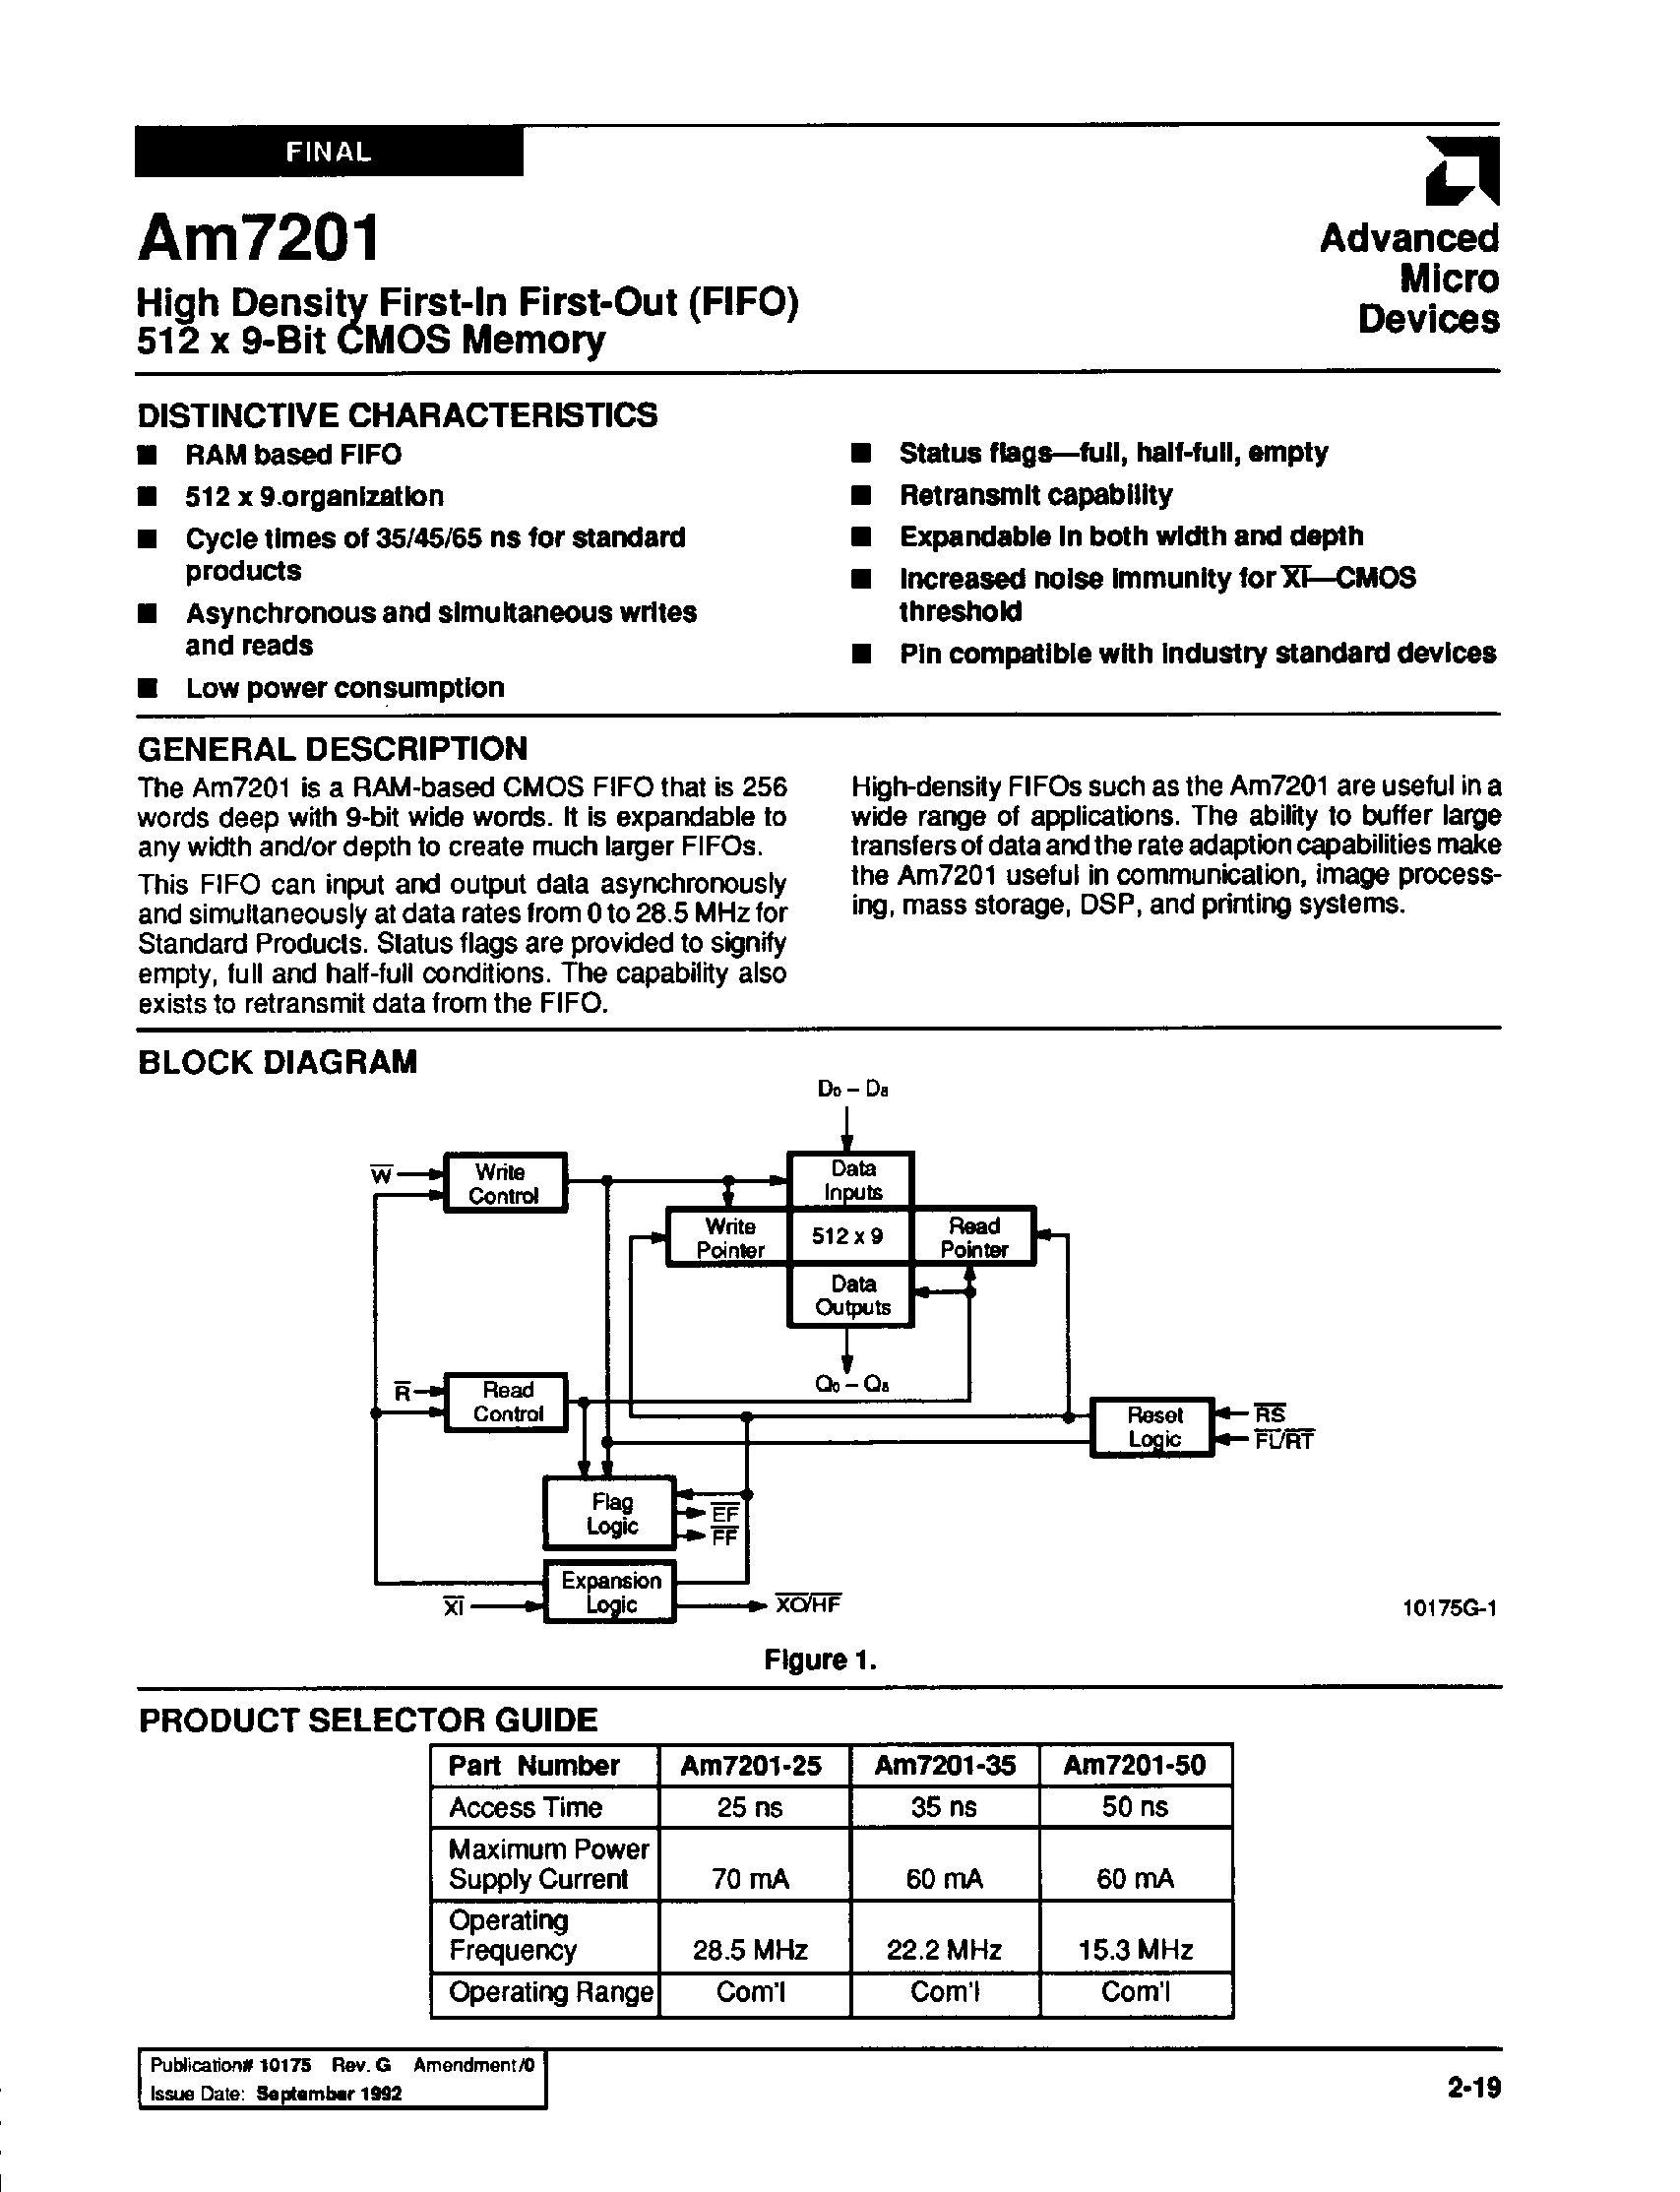 Datasheet Am7201-25PC - HIGH DENSITY FIRST-IN FIRST-OUT(FIFO) 512 x 9-BIT CMOS MEMORY page 1